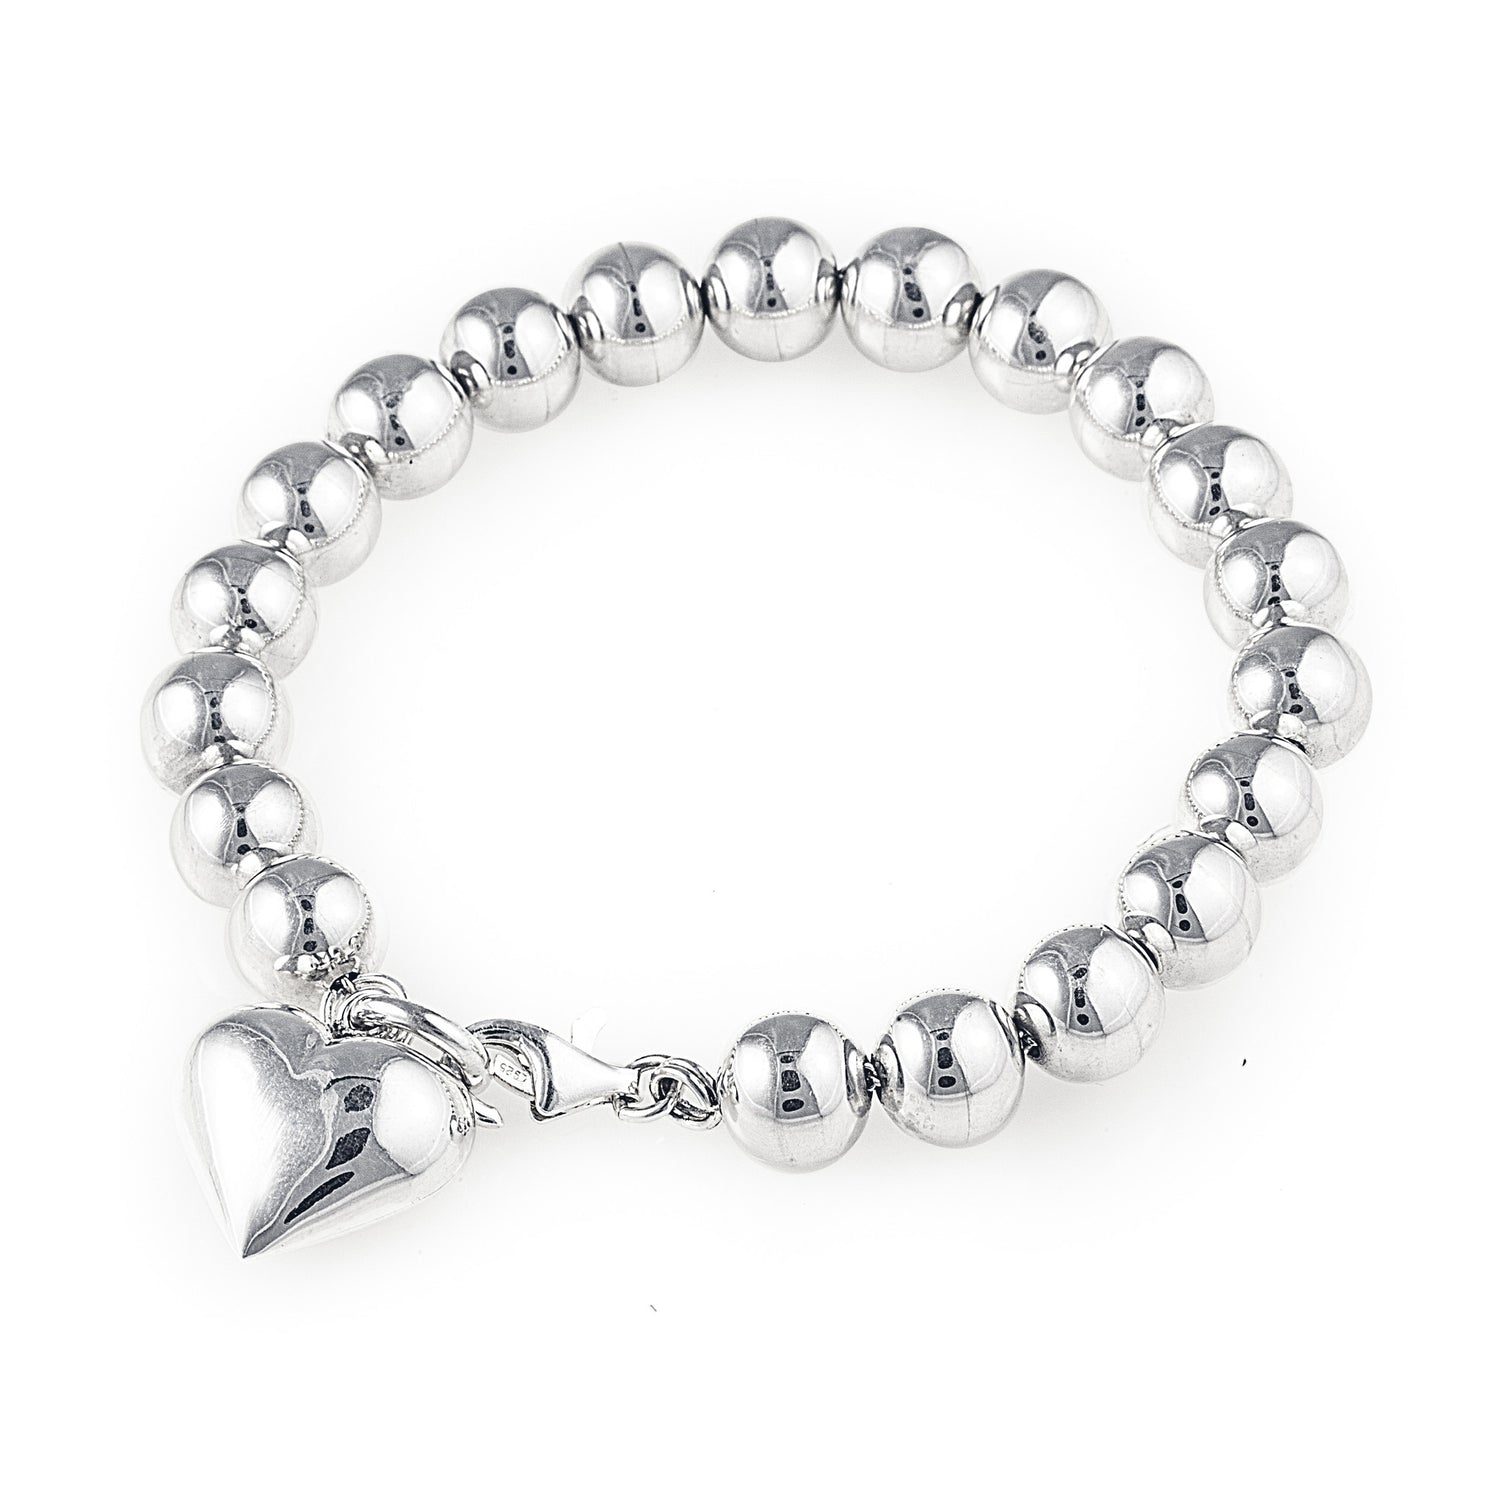 Contessa Bracelet is made of 10mm 925 sterling silver beads threaded onto a sturdy chain for those who want a modern take on the classic pearl bracelet. The bracelet features a silver heart charm. Worldwide Shipping